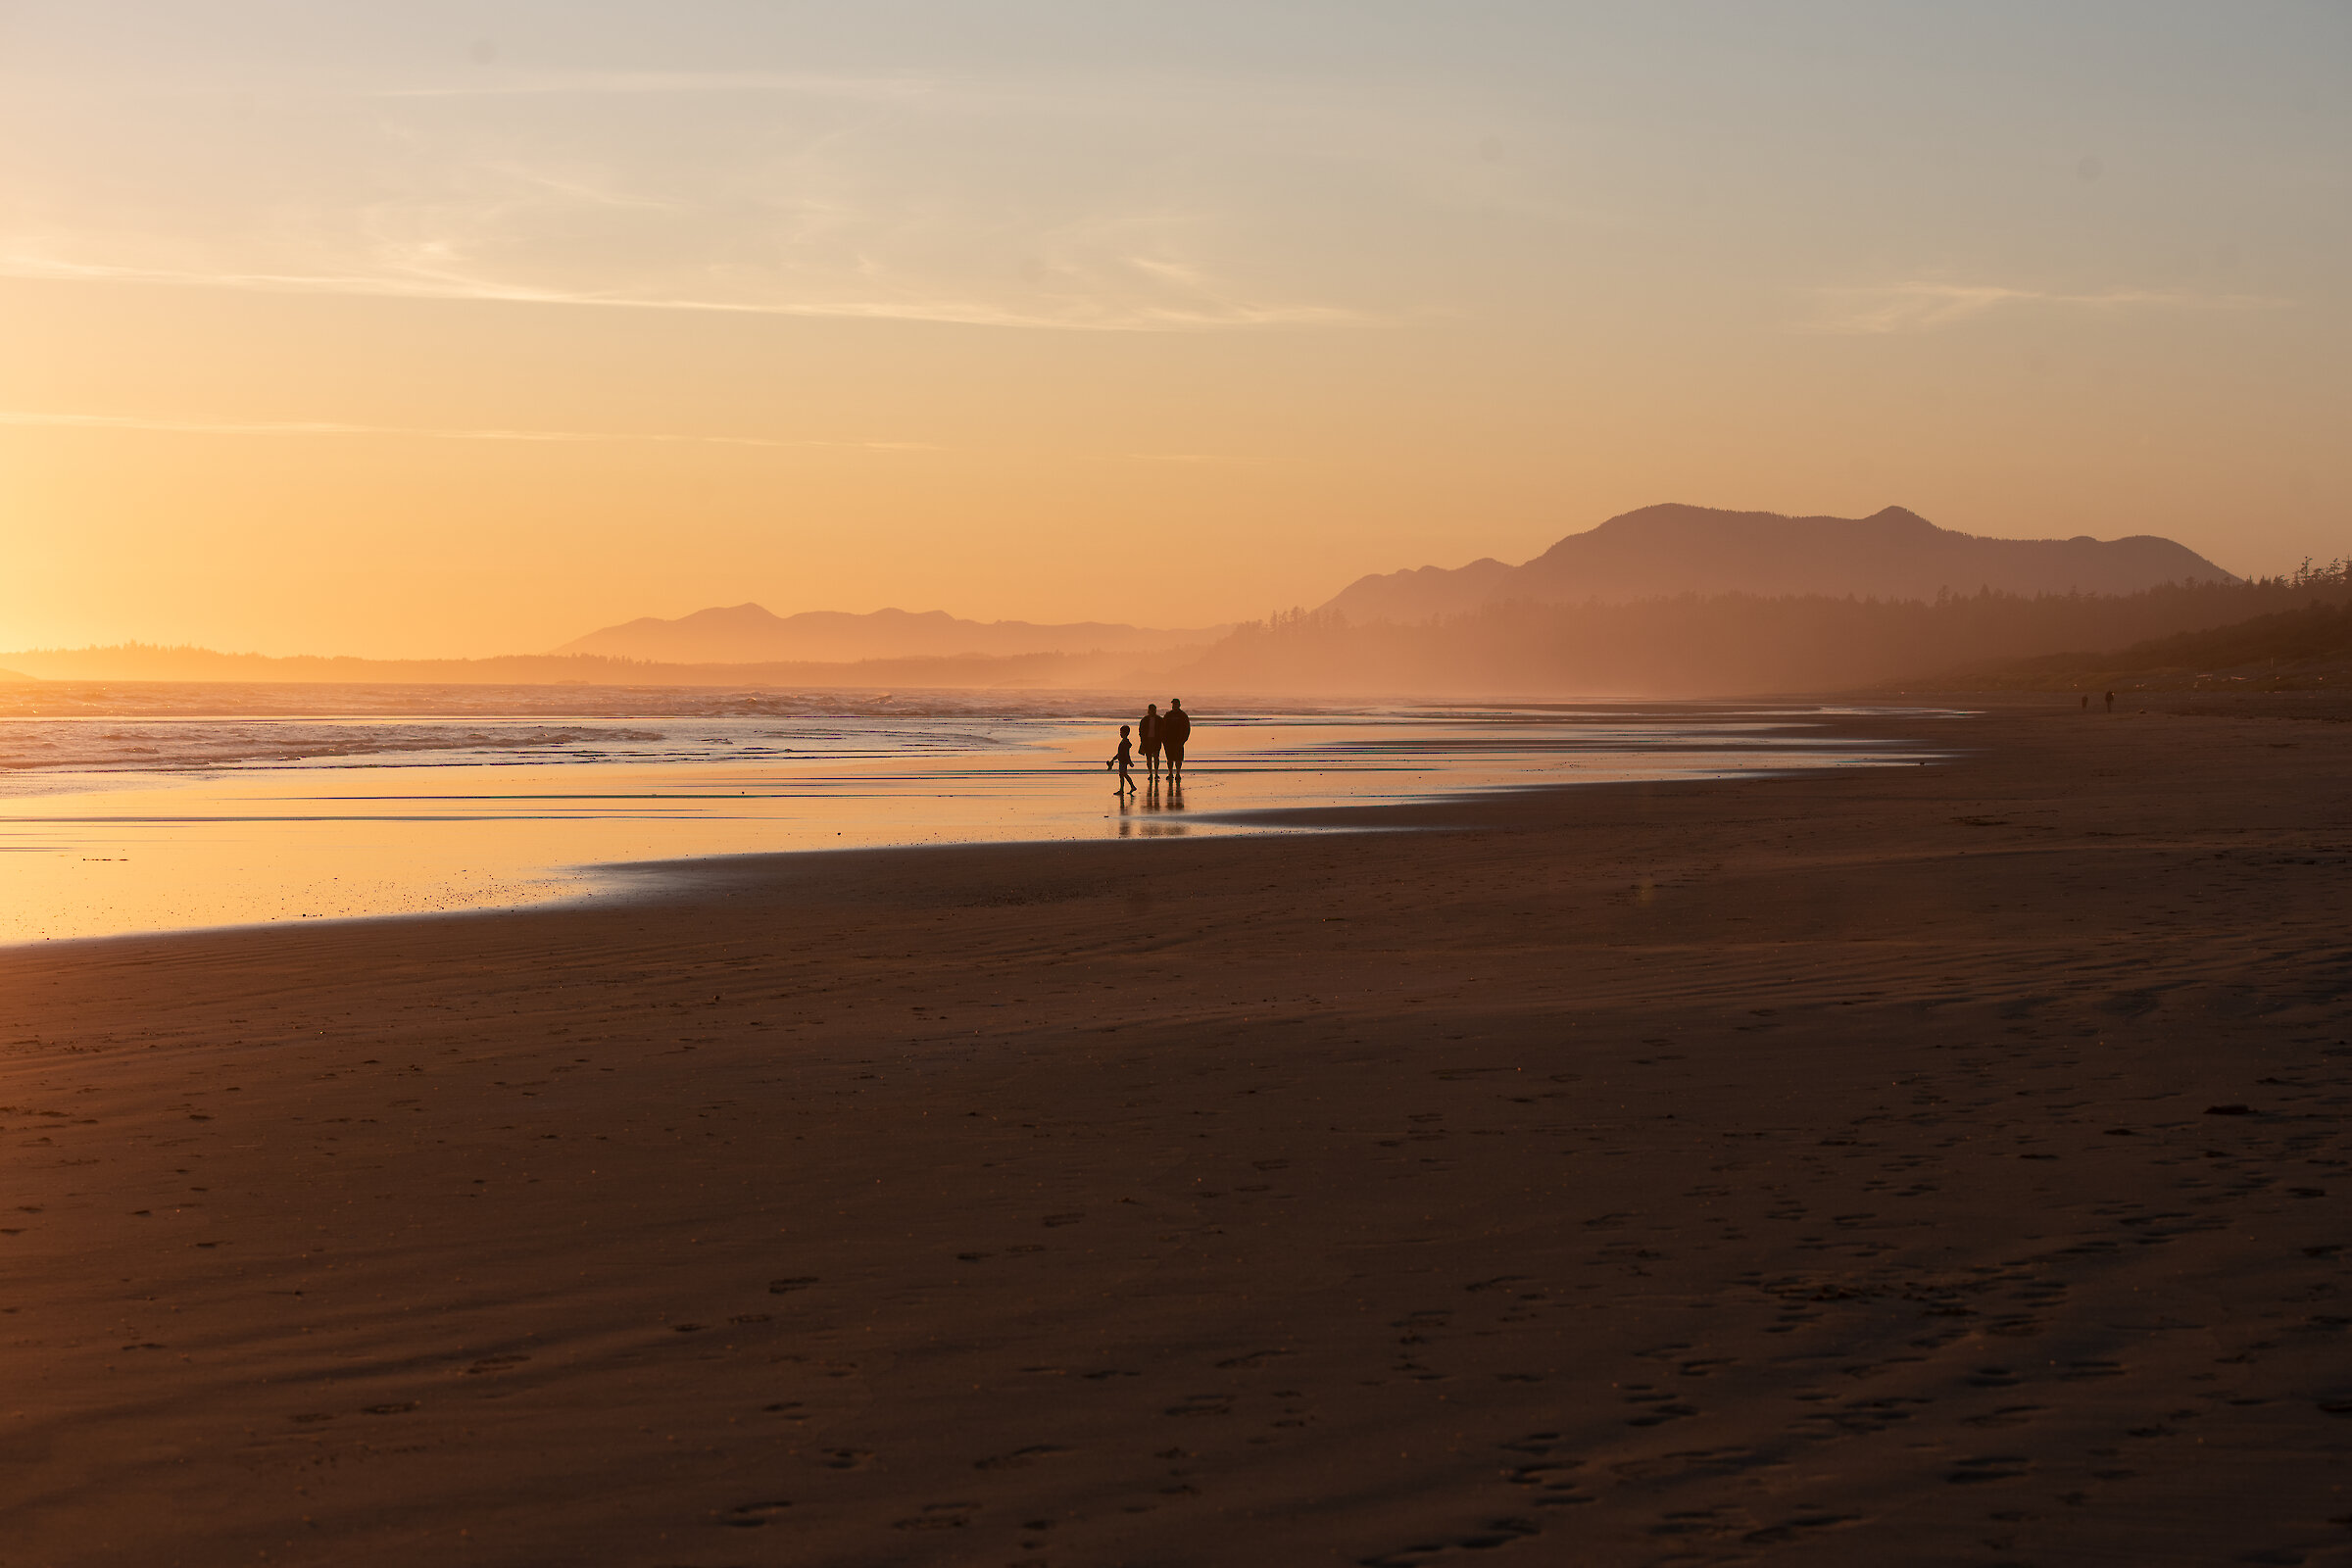 Two people and a child walking along Wickaninnish Beach at sunset